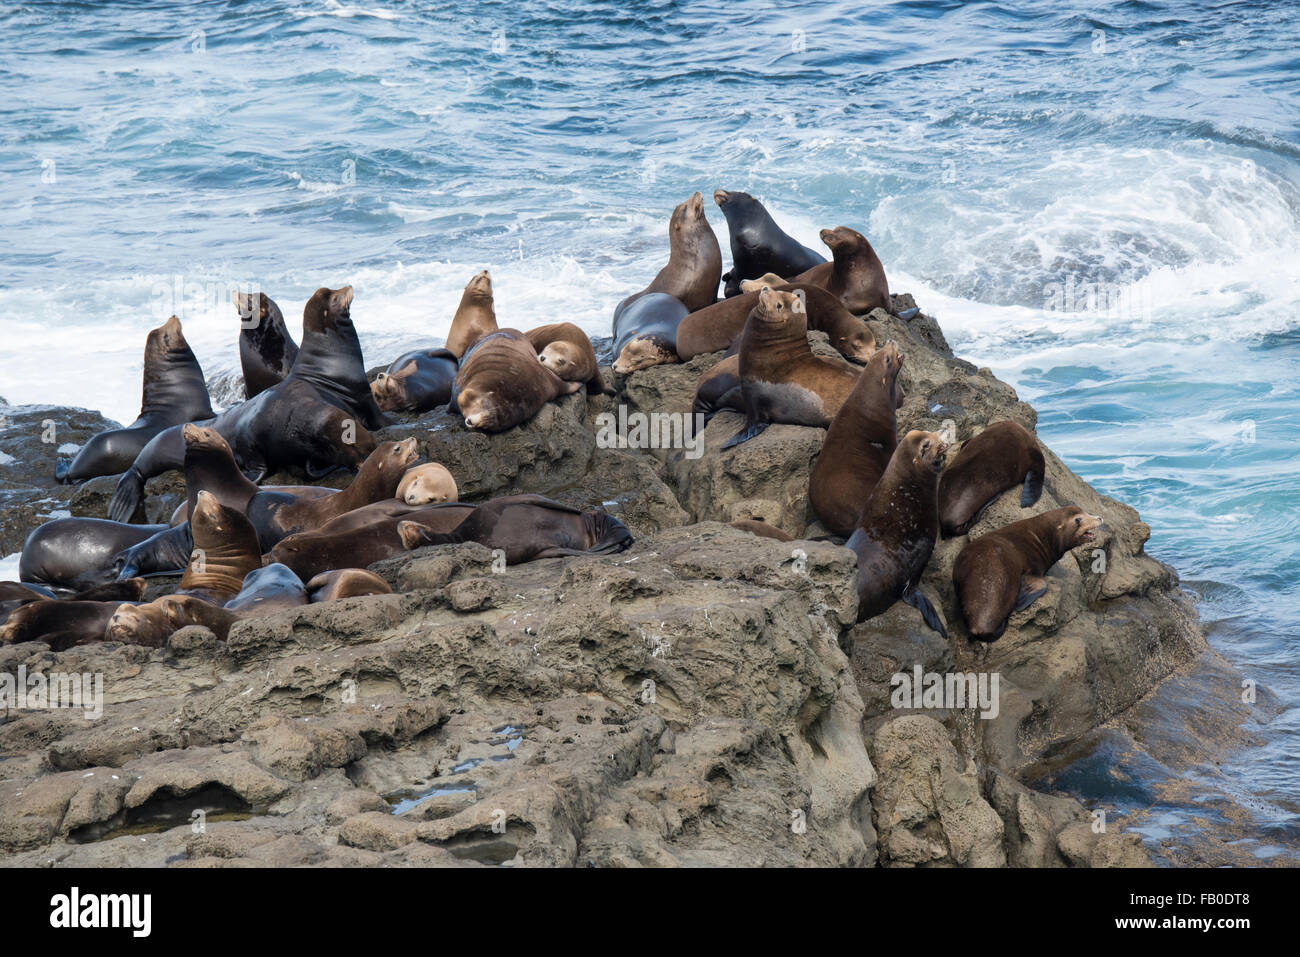 Sea lions on a rocky promontory in the Pacific Ocean on the Oregon Coast in Cape Arago State Park near Coos Bay, Oregon. Stock Photo